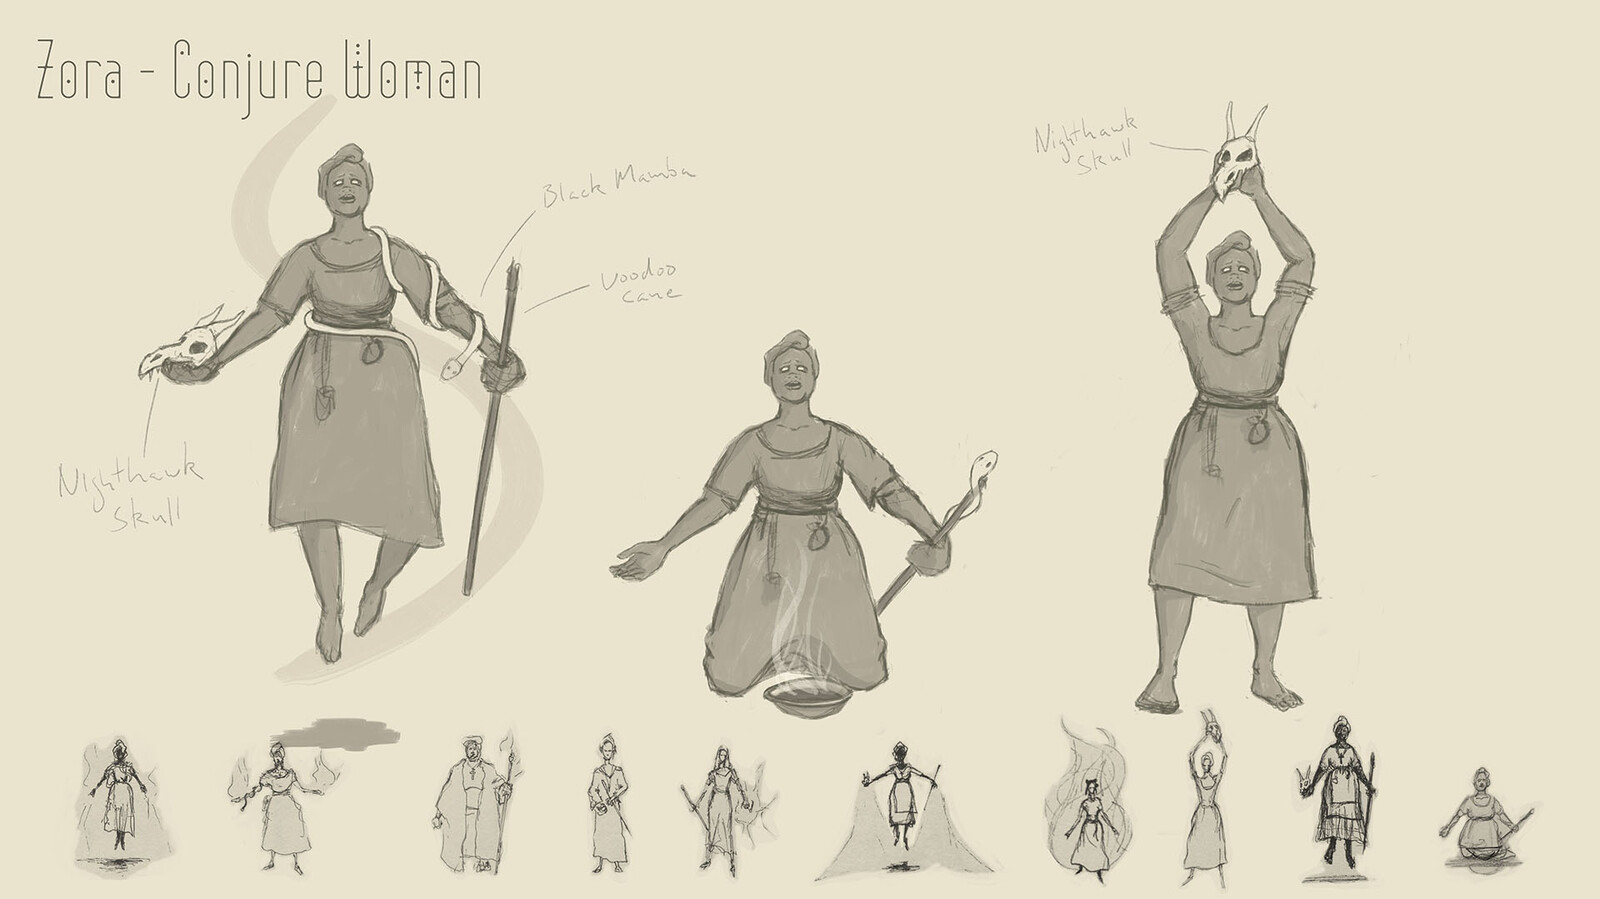 Zora the Conjure Woman sketches and ideation.